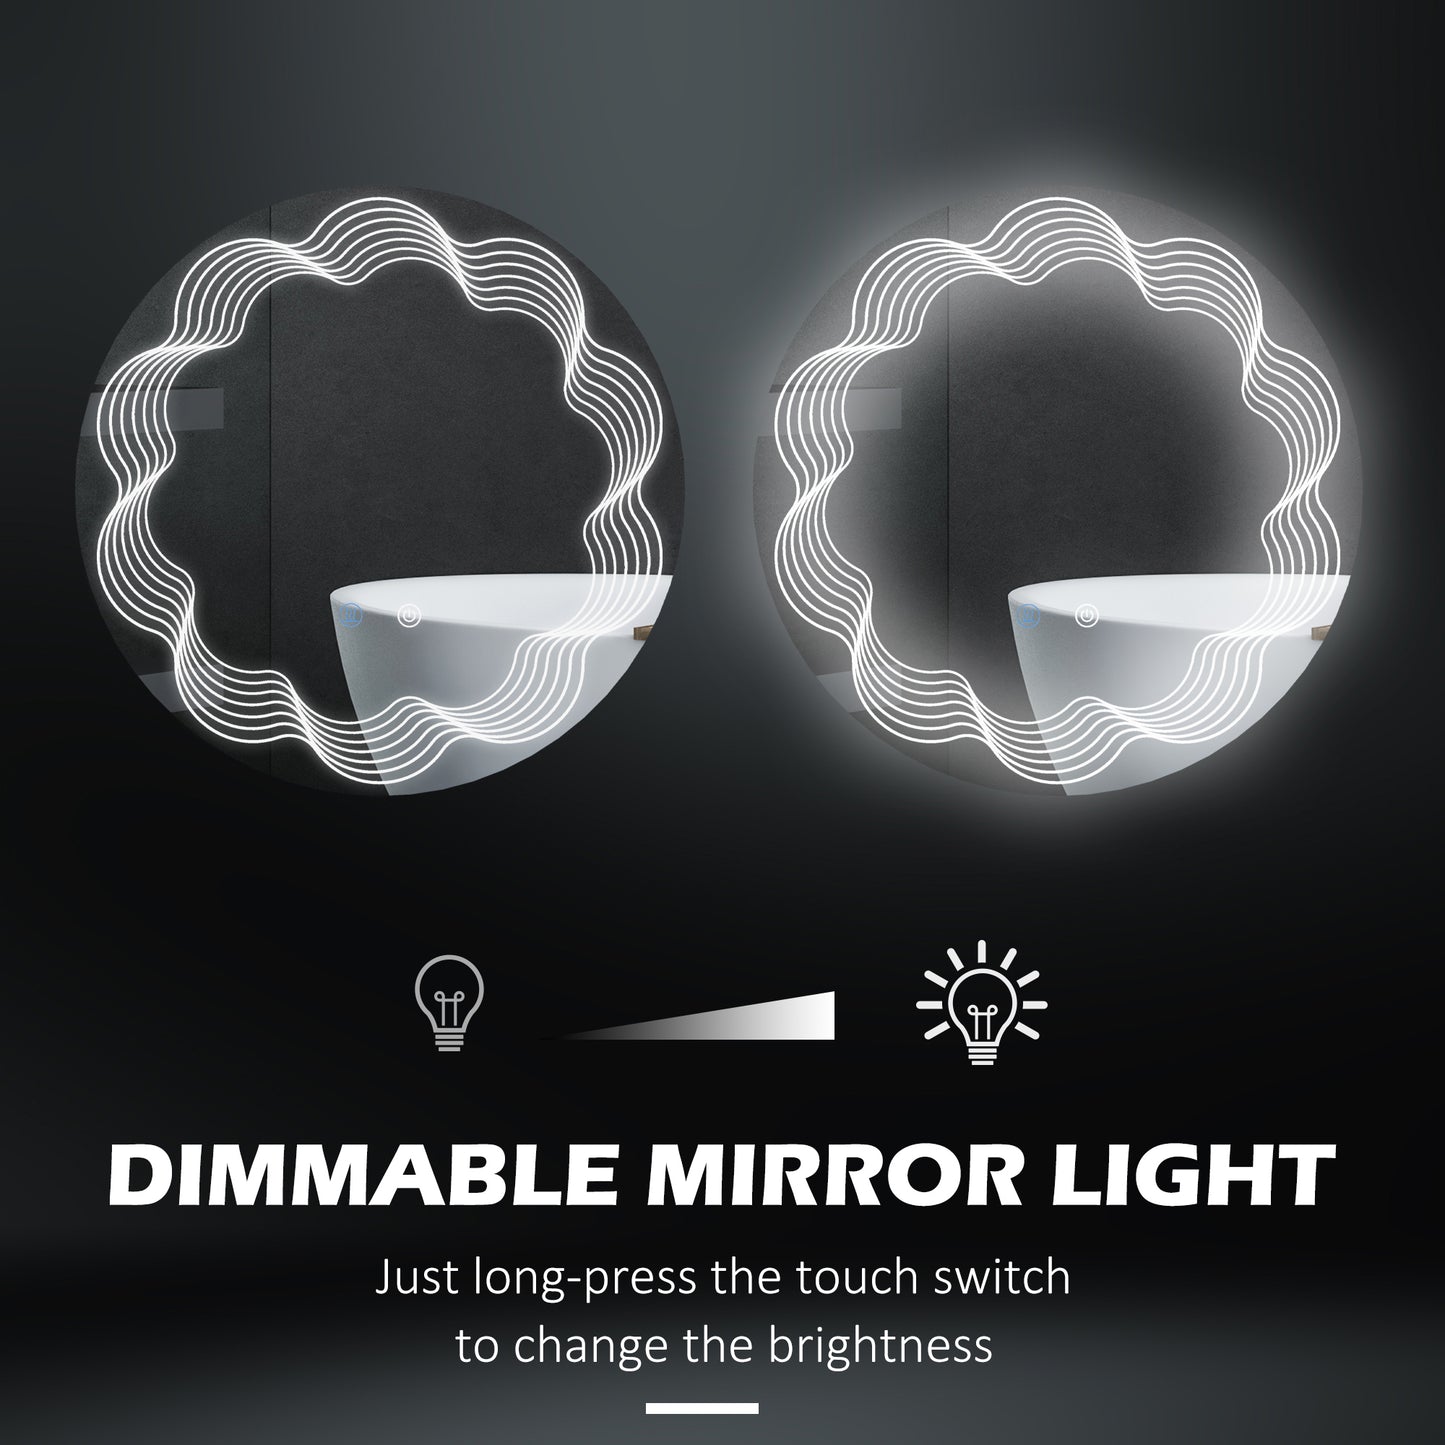 kleankin Round Illuminated Bathroom Mirrors w/ LED Dimming Lighted , Wall Mounted Vanity Mirror w/ 3 Colour, Smart Touch, Anti-Fog, 60cm